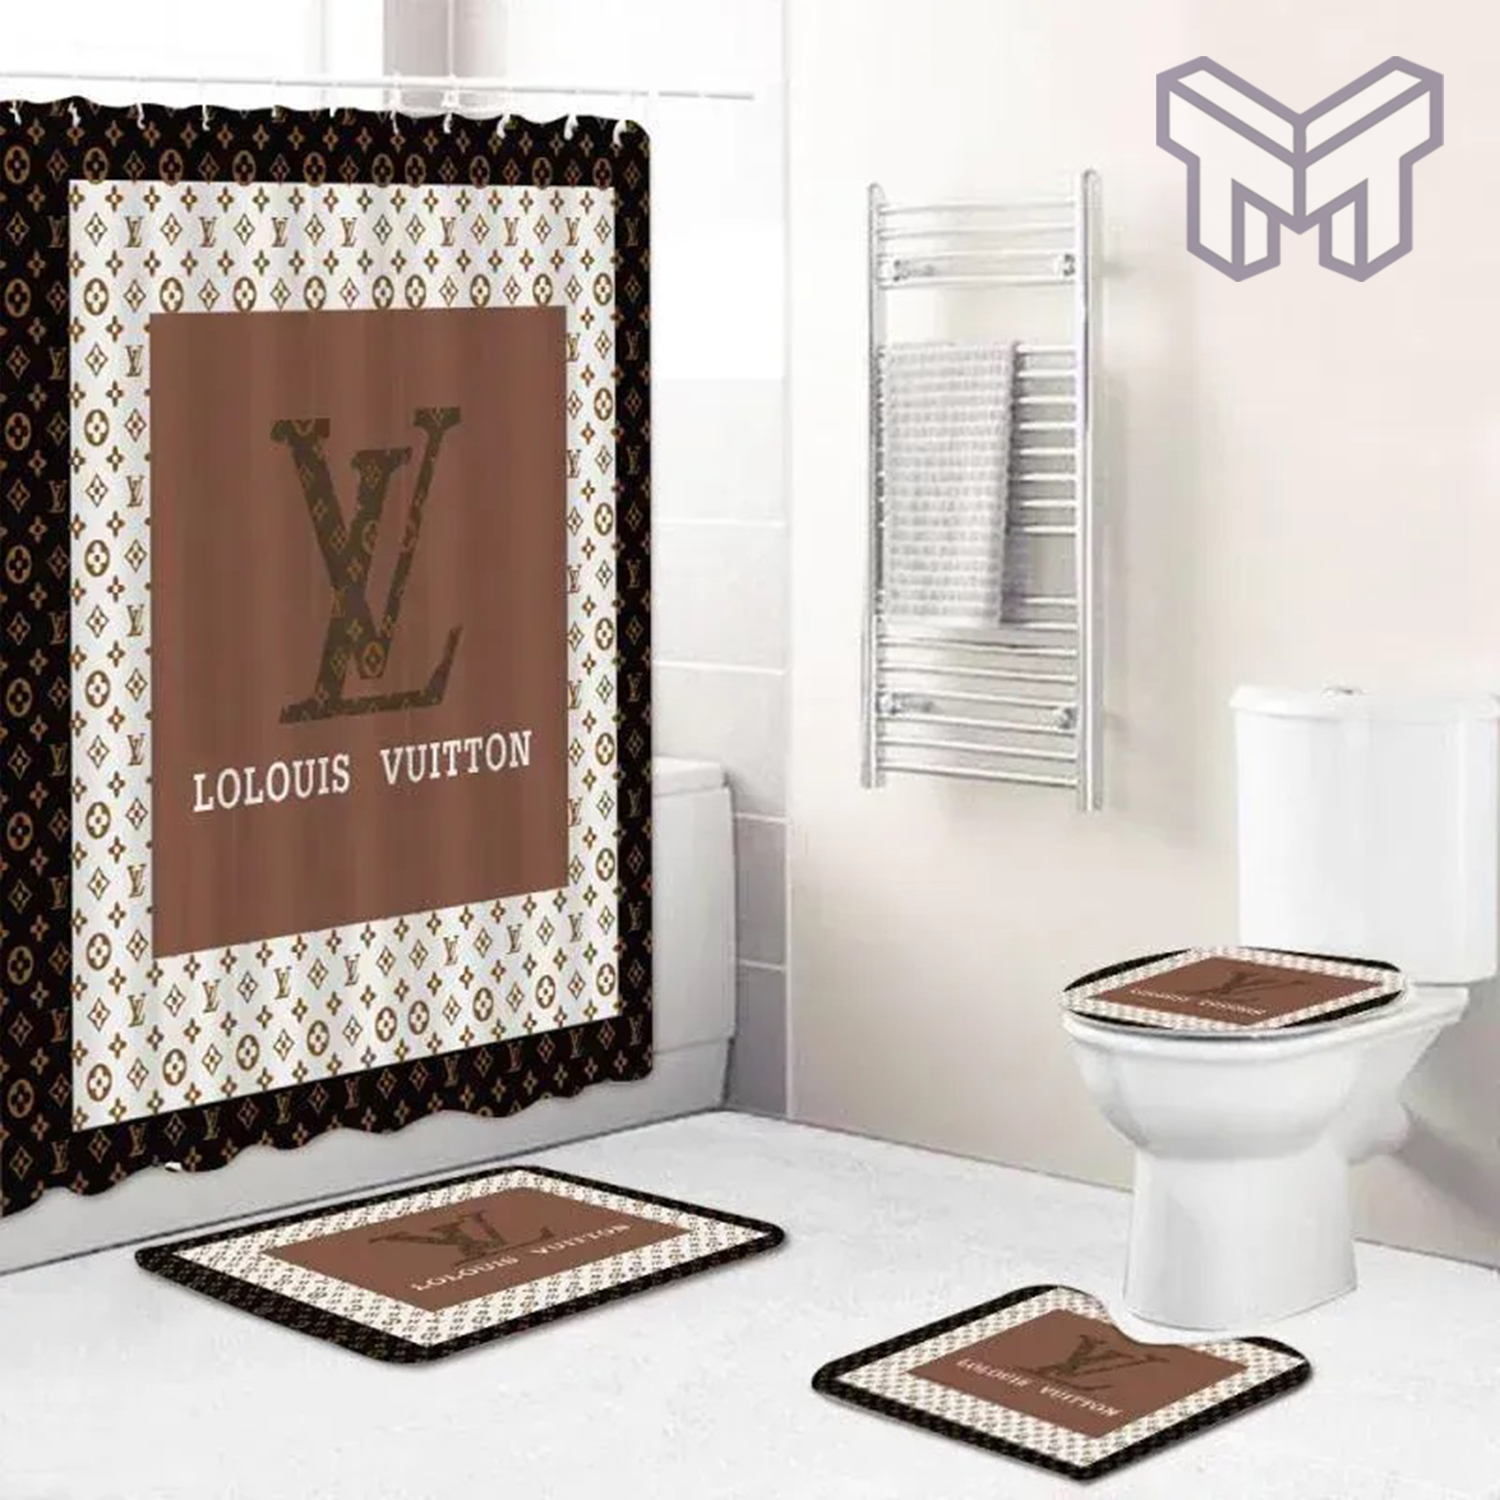 Louis Vuitton Bathroom Set Luxury Shower - Shower Curtain And Rug Toilet  Seat Lid Covers Bathroom Set - Infinite Creativity. Spend Less. Smile More